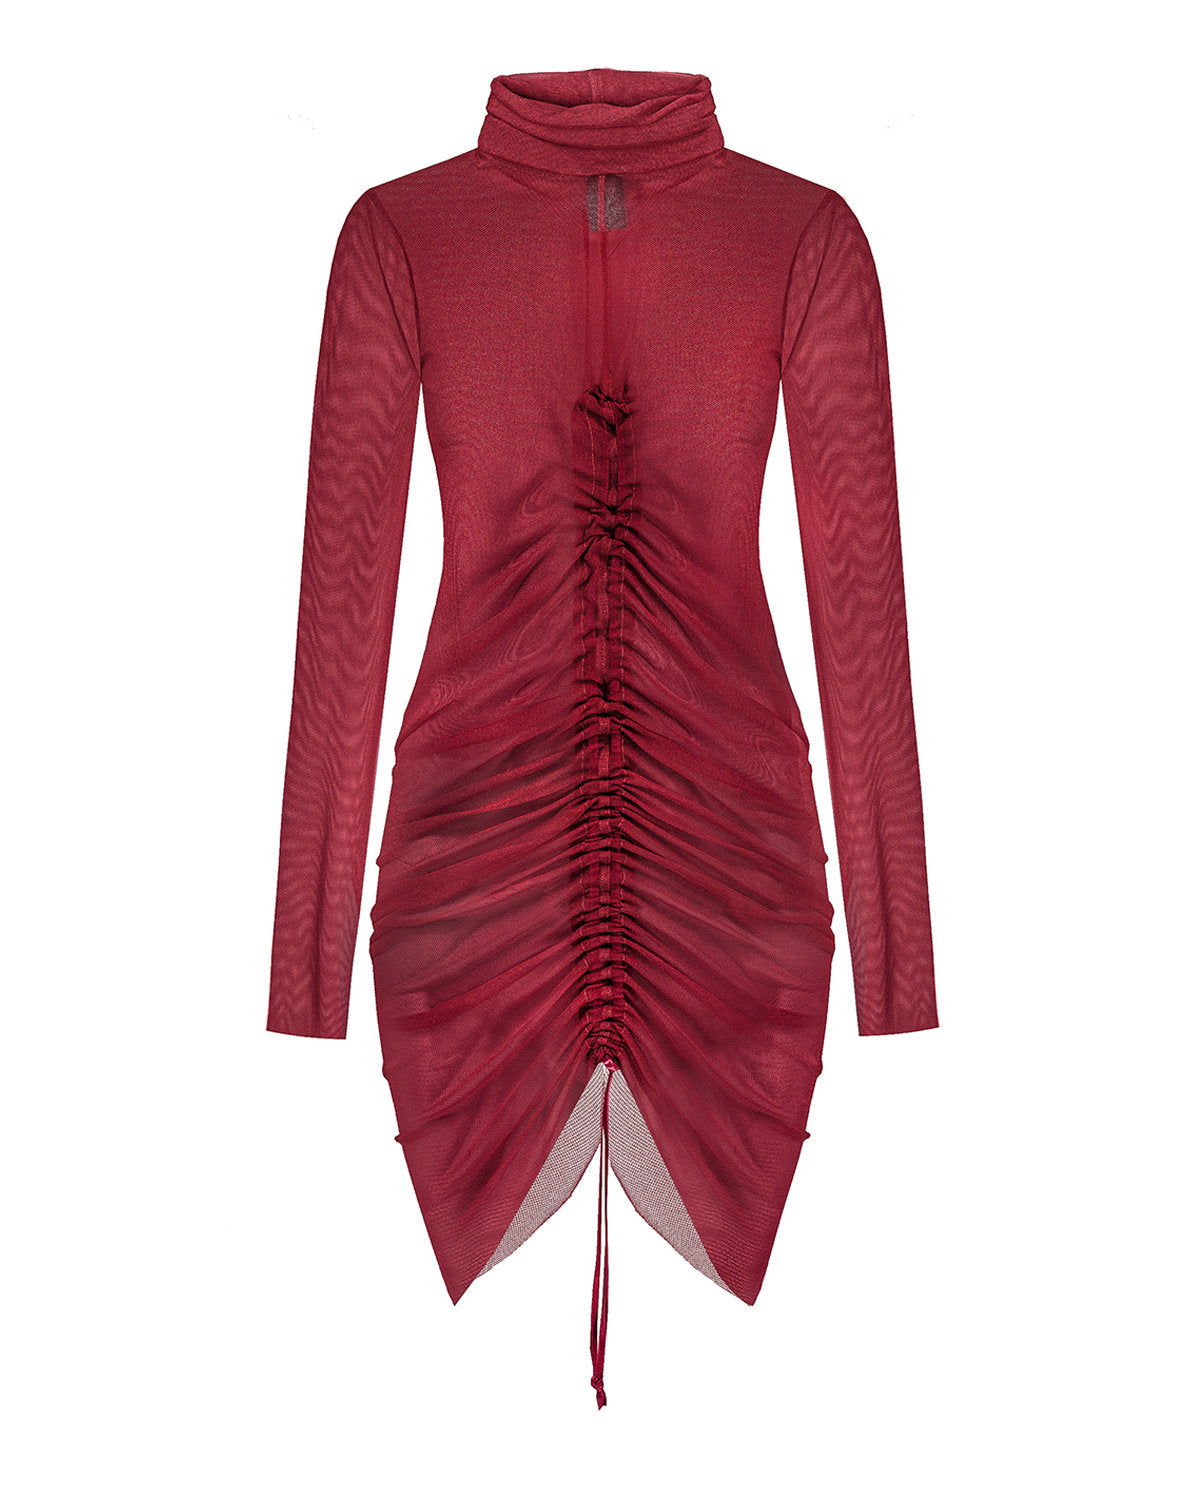 Translucent dress in bordeaux red